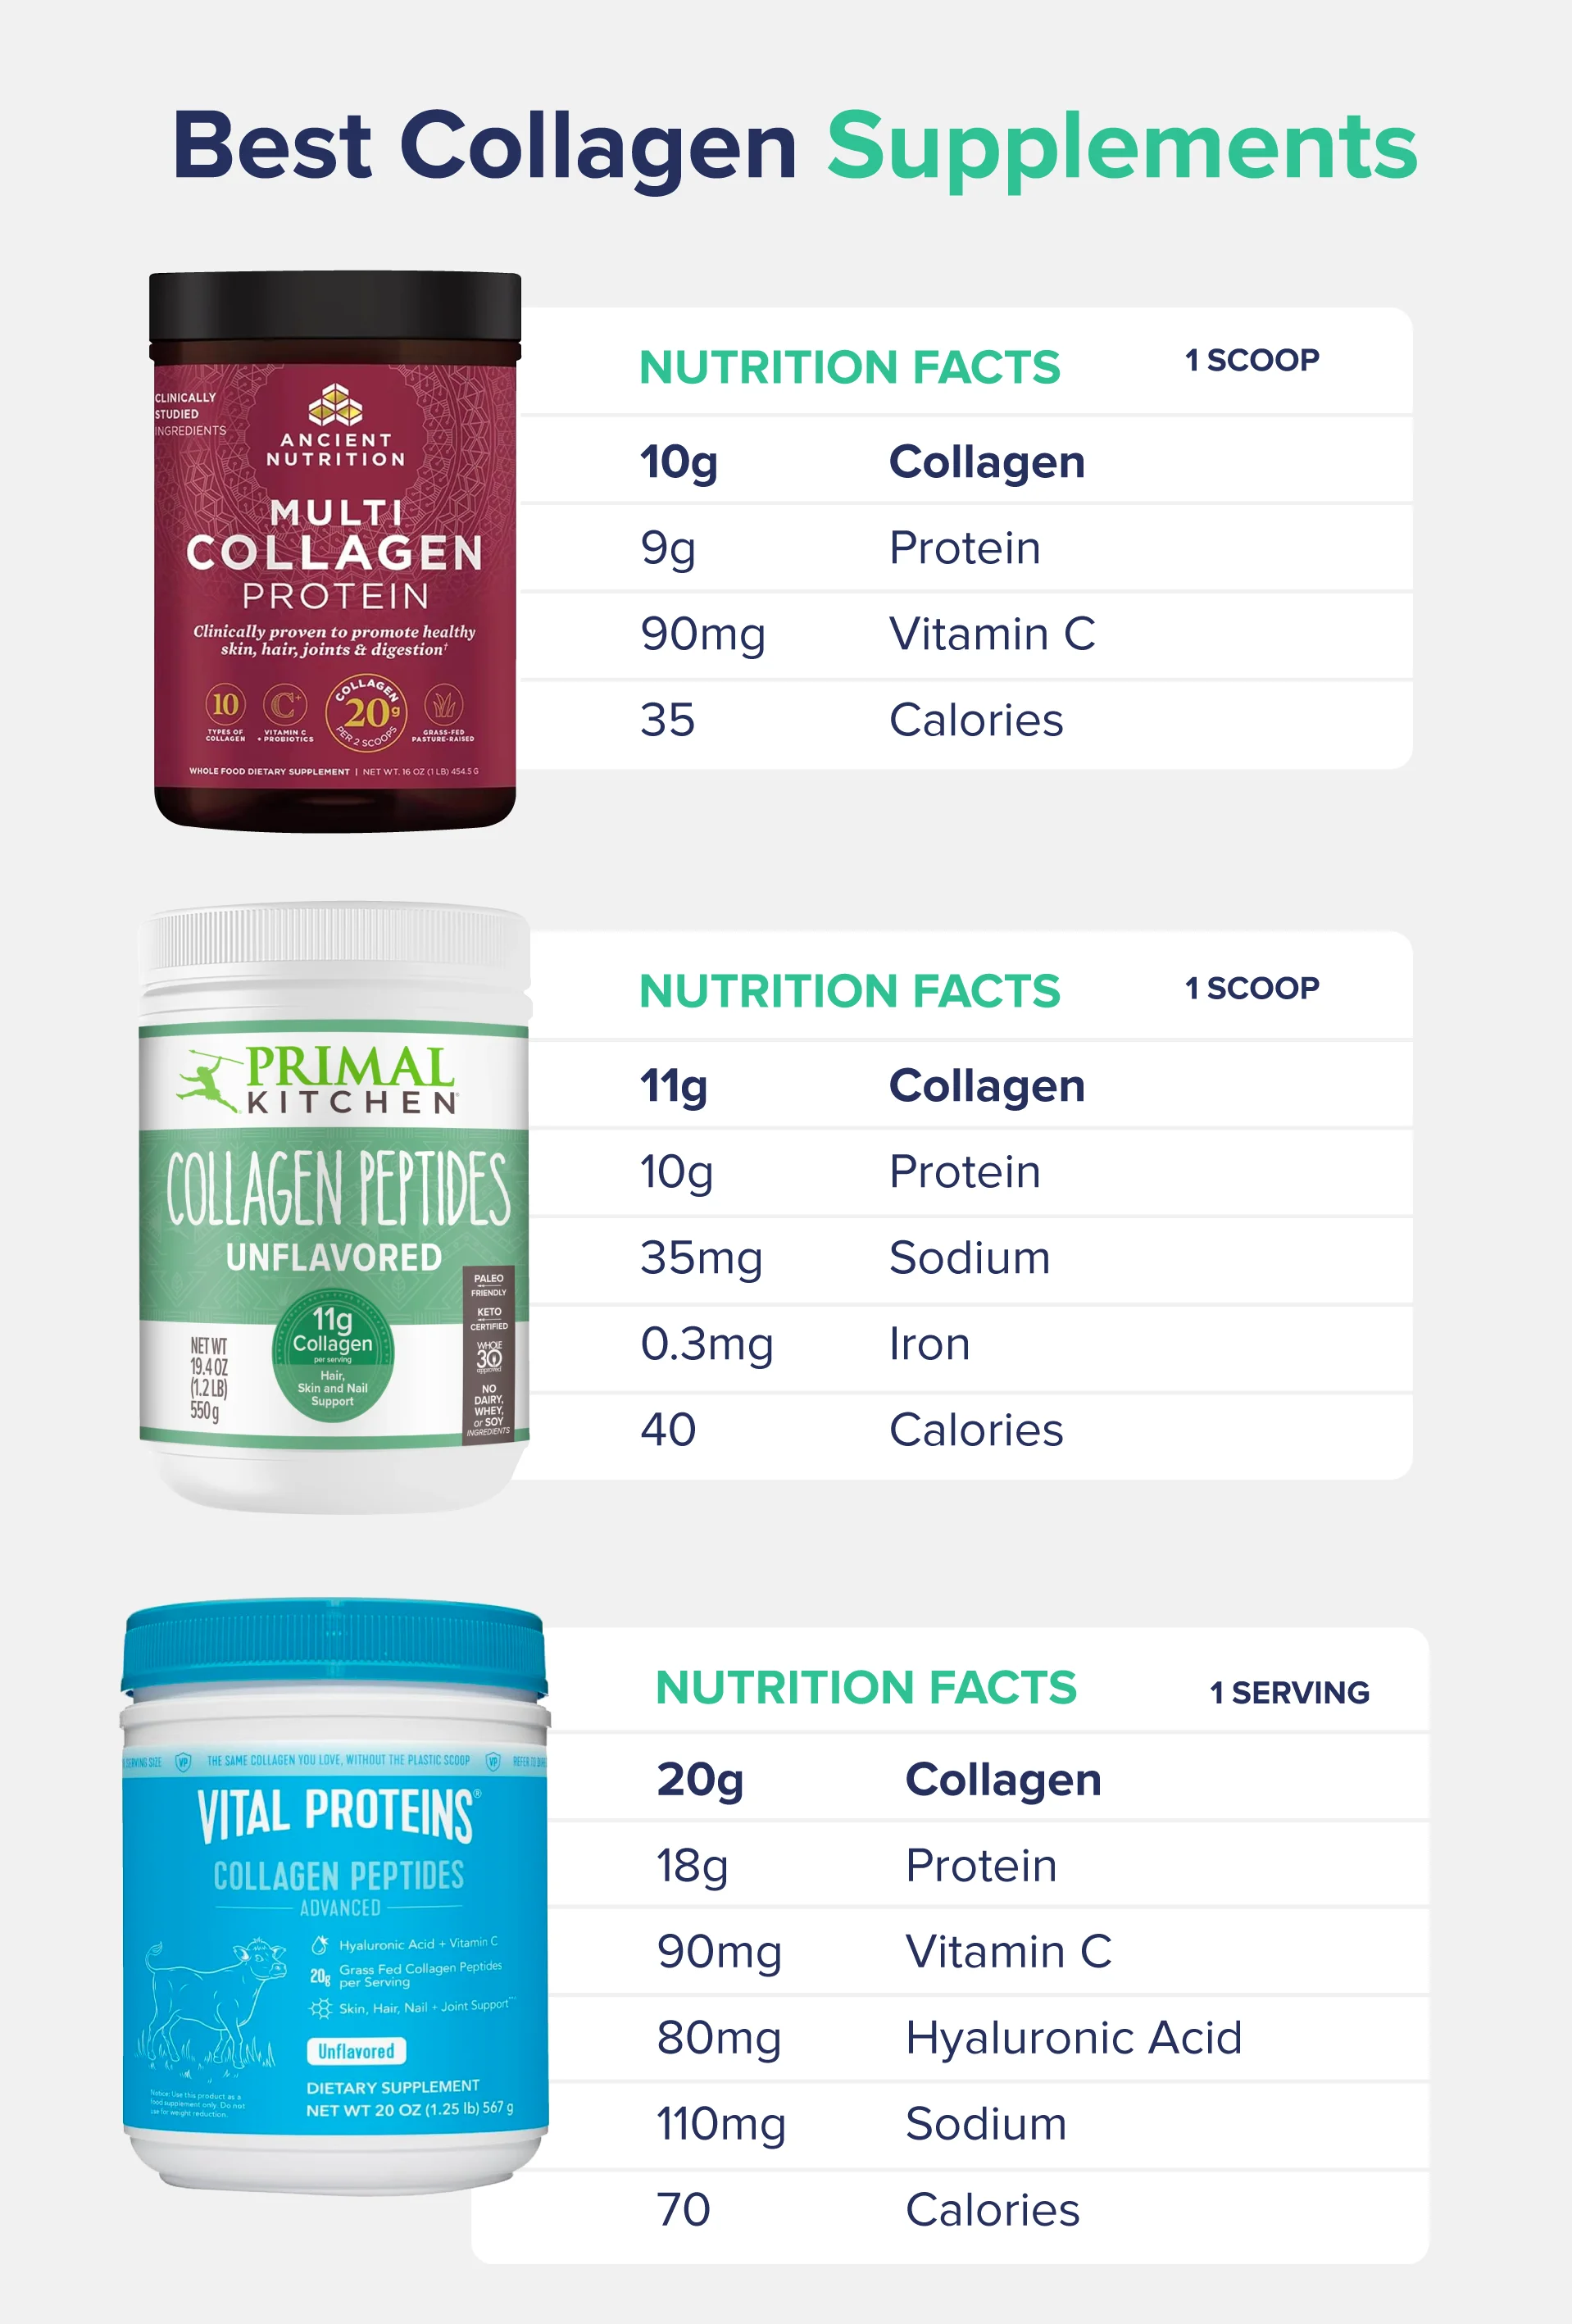 A graphic entitled "Best Collagen Supplements" displaying images of Ancient Nutrition, Primal Kitchen, and Vital Proteins products with accompanying nutrition facts.